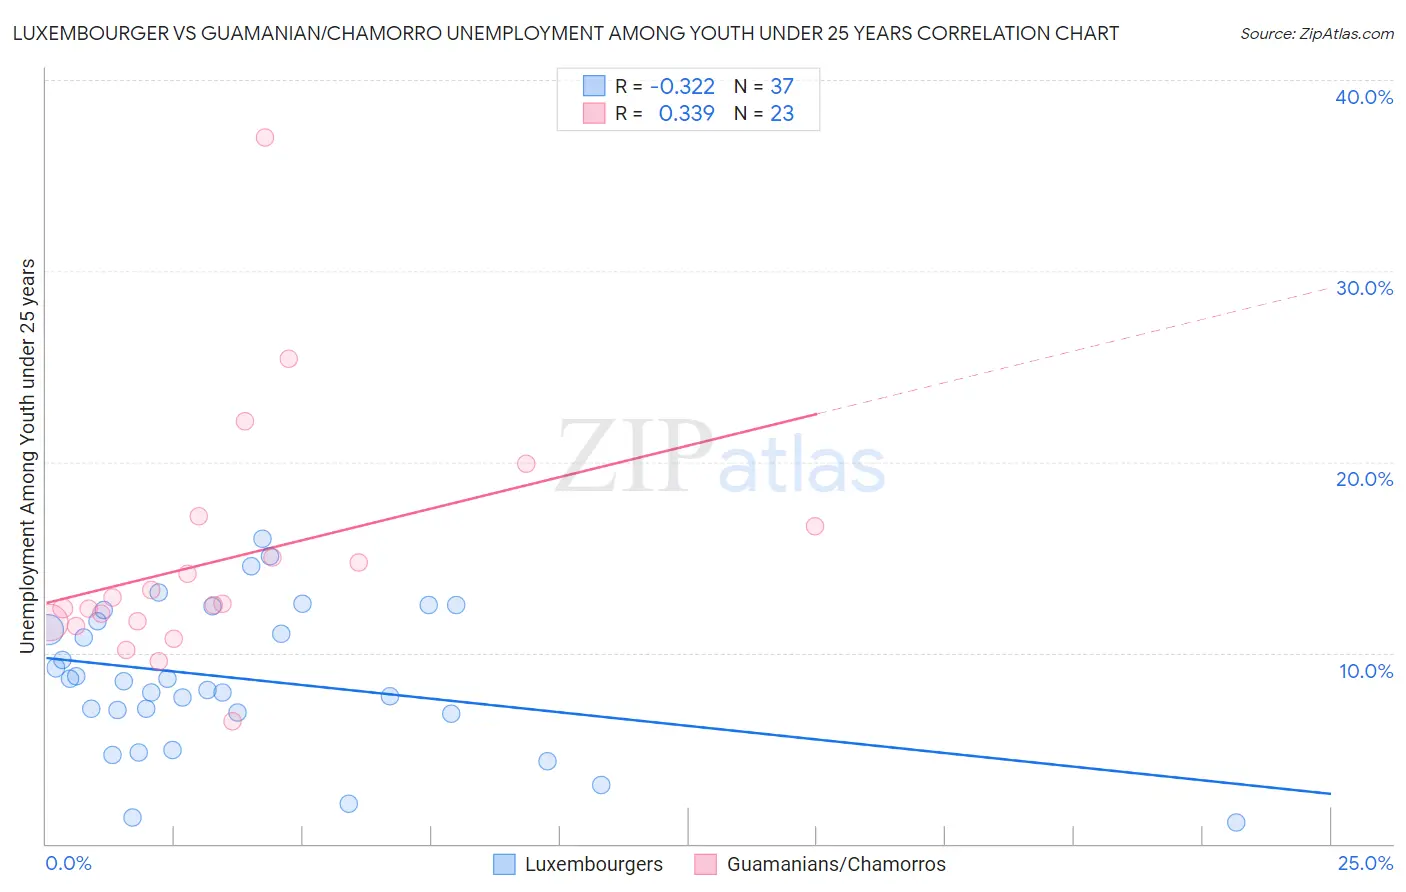 Luxembourger vs Guamanian/Chamorro Unemployment Among Youth under 25 years